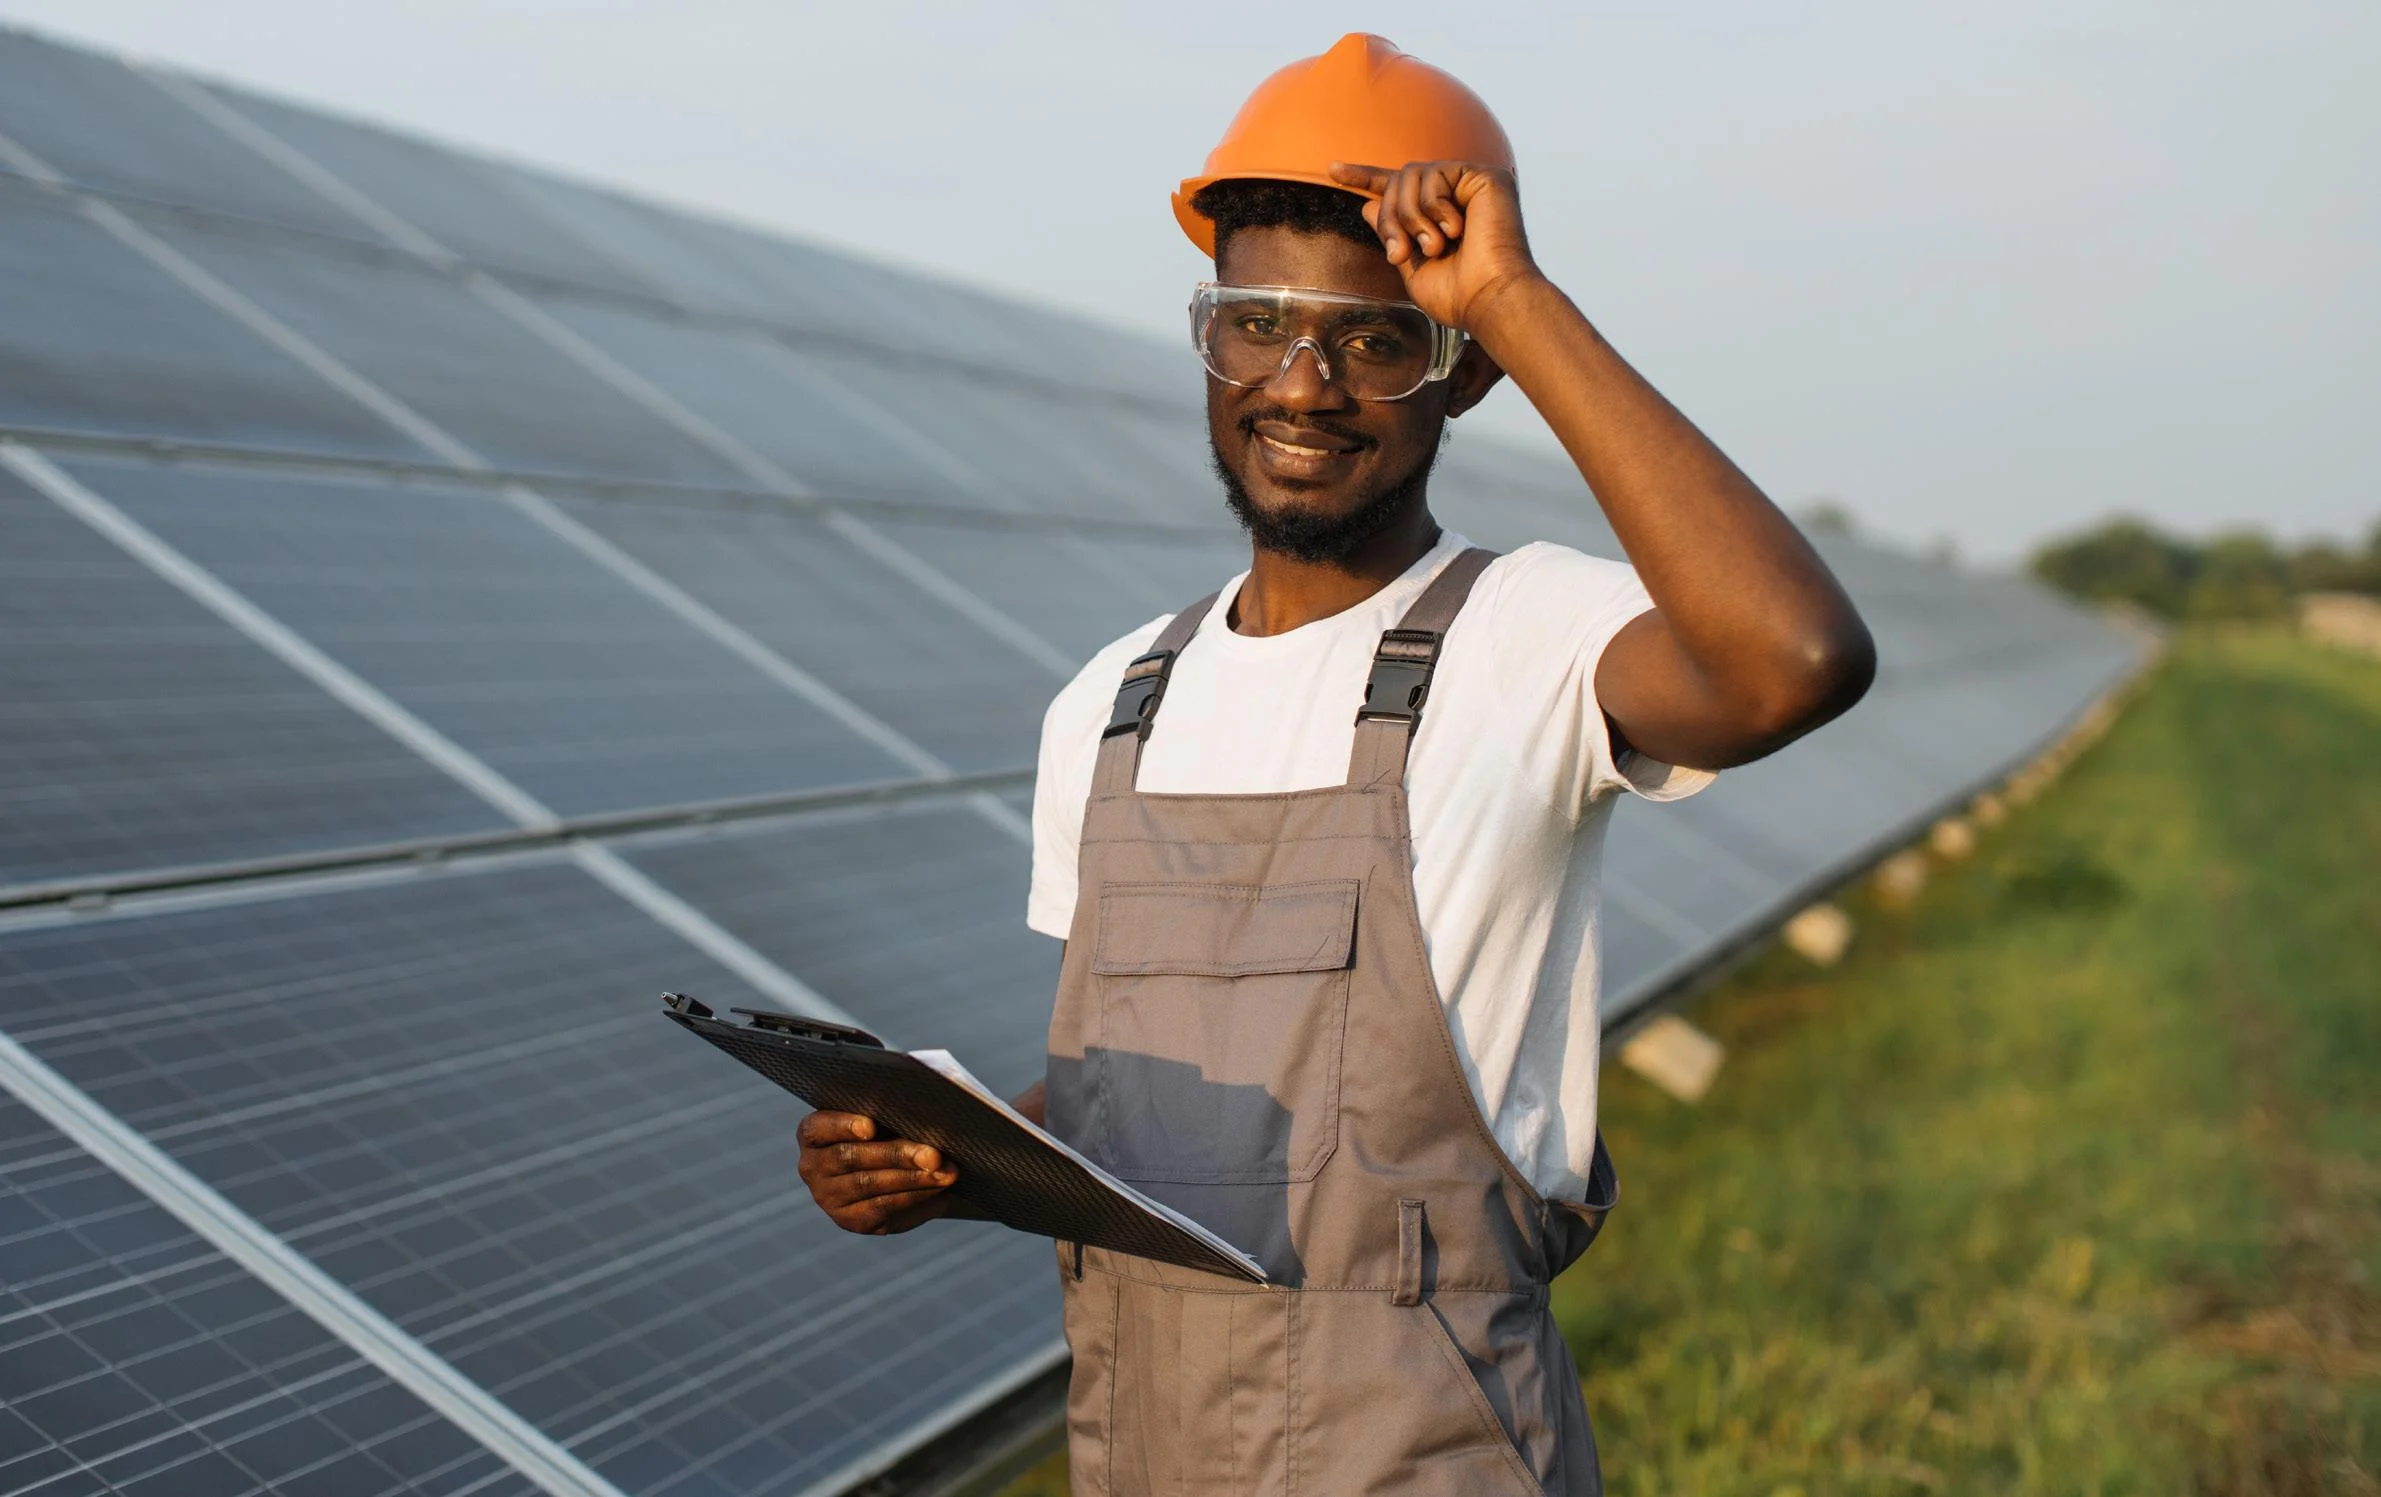 Hohm Energy Secures $8M Seed Funding To Drive Rooftop Solar Adoption In South Africa